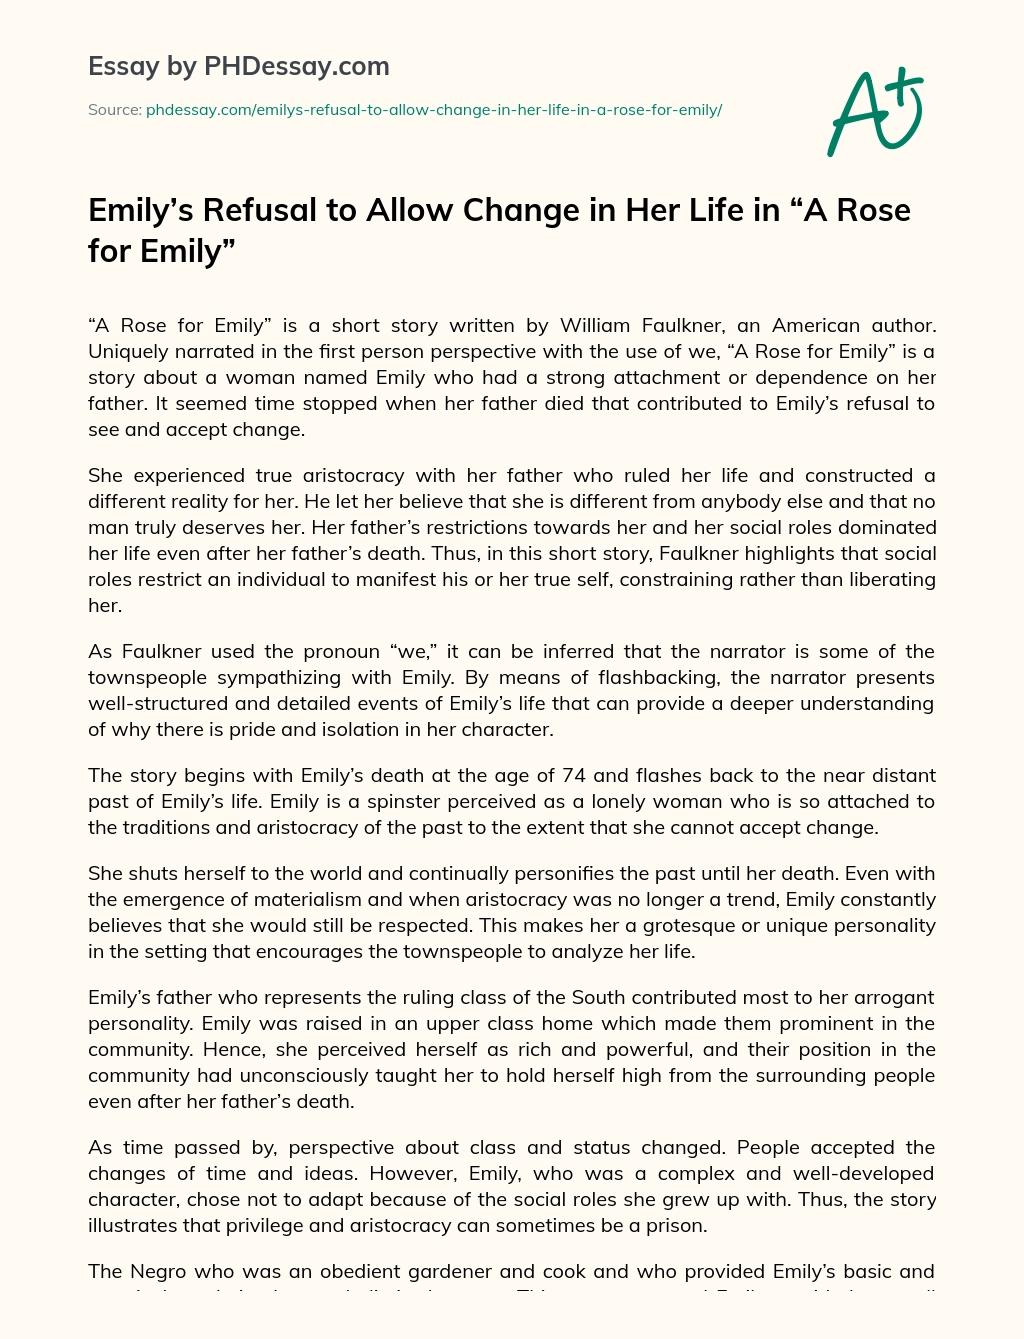 Emily’s Refusal to Allow Change in Her Life in “A Rose for Emily” essay